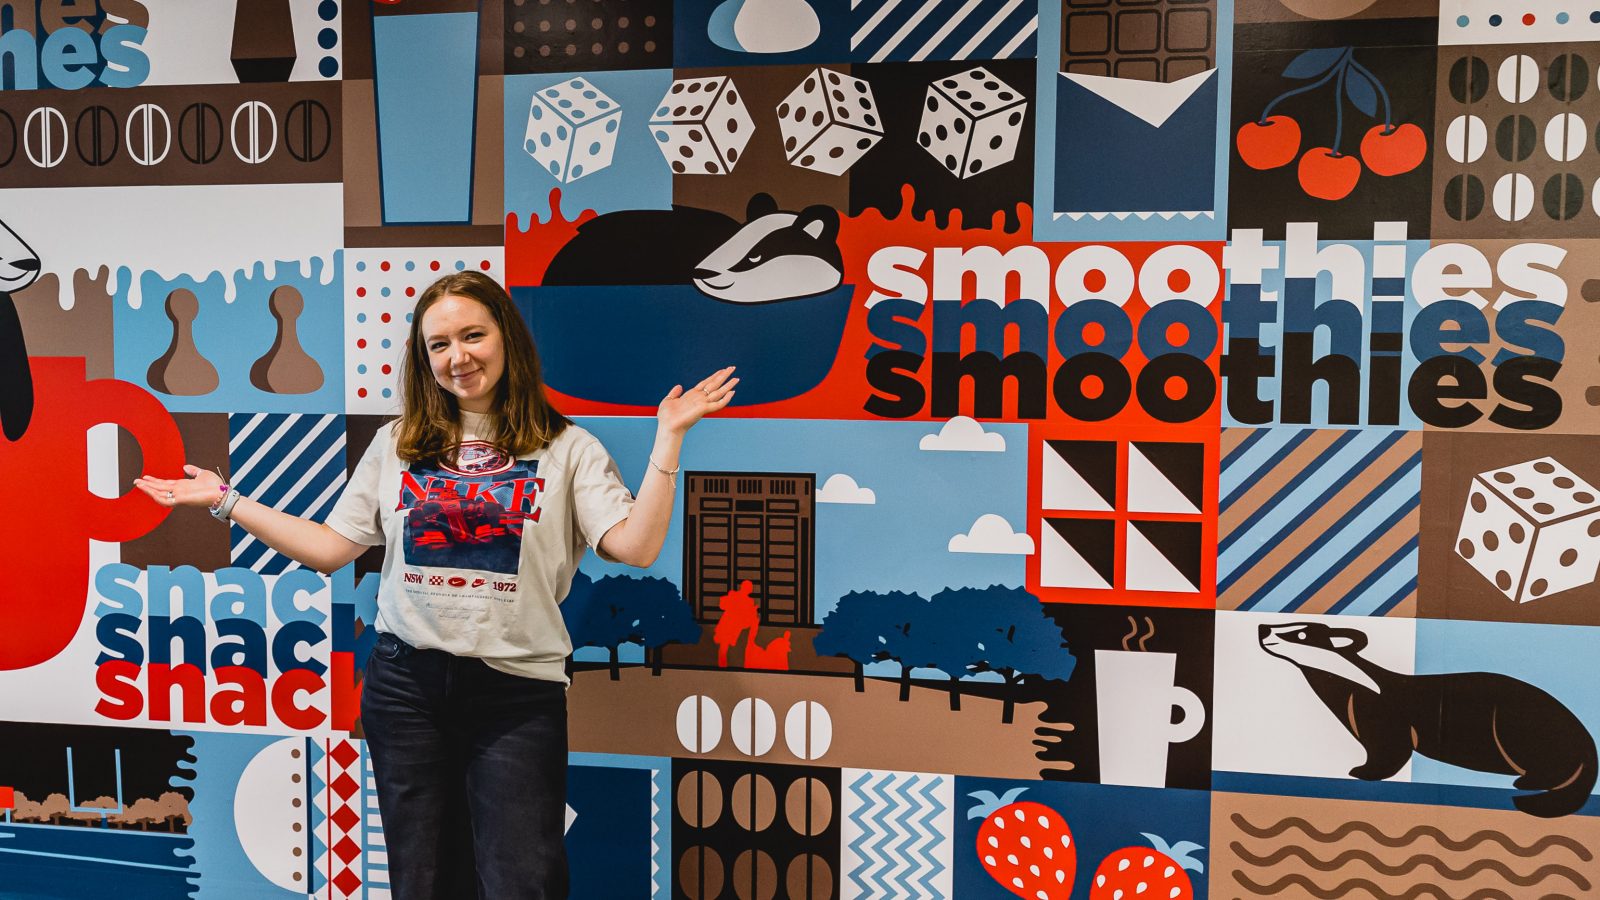 A young woman stands in front of a colourful mural painted on a wall.